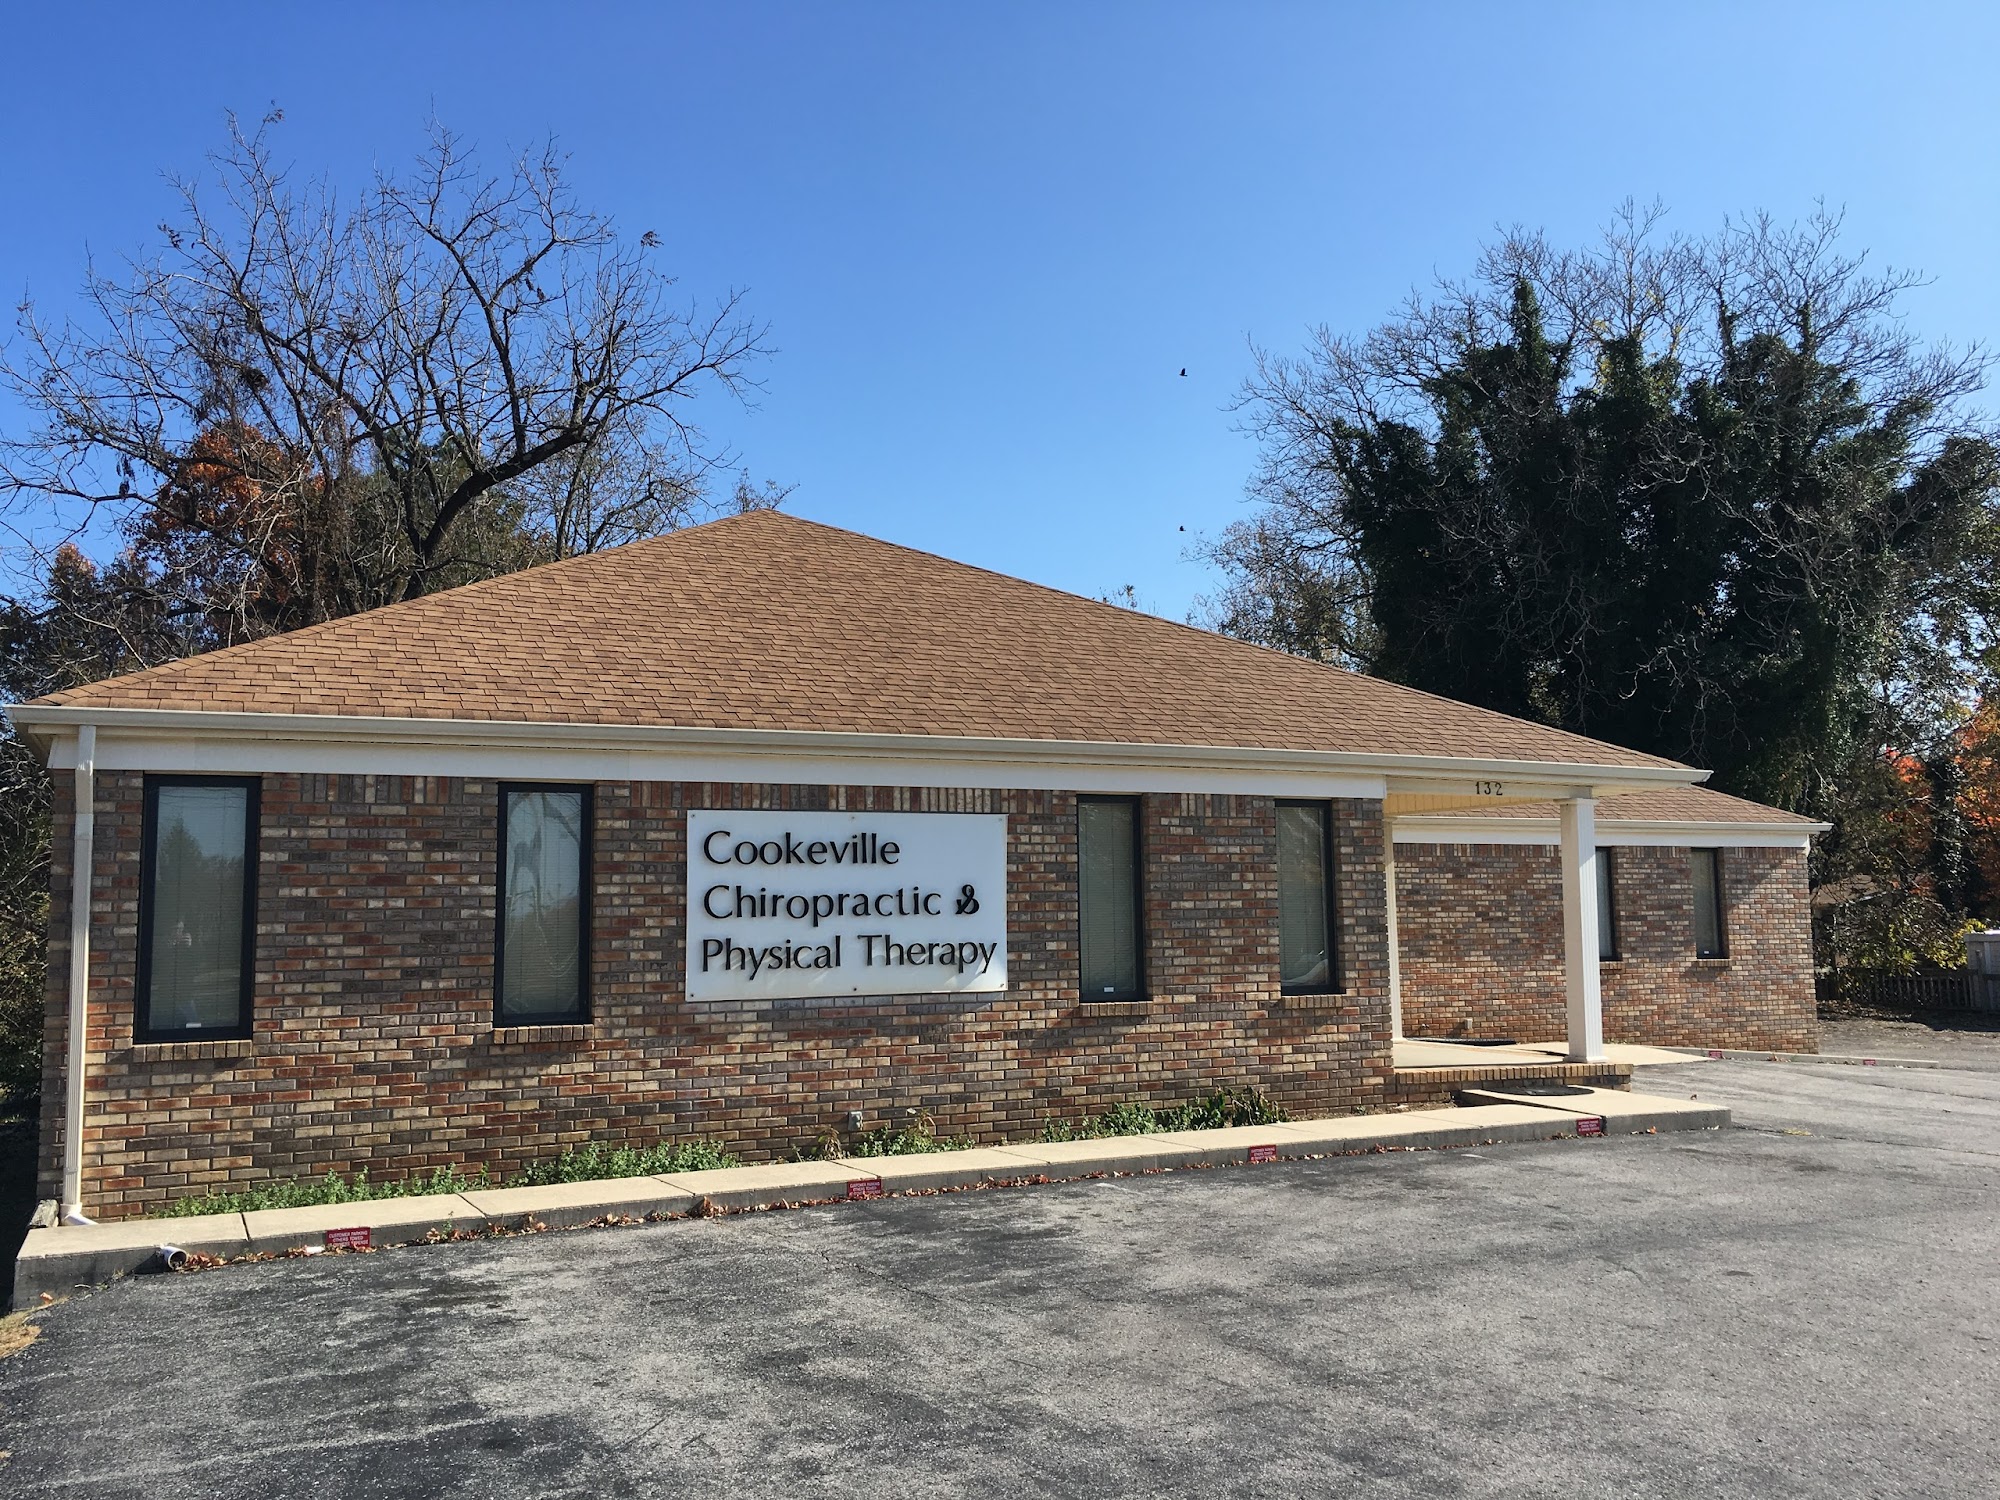 Cookeville Chiropractic & Physical Therapy